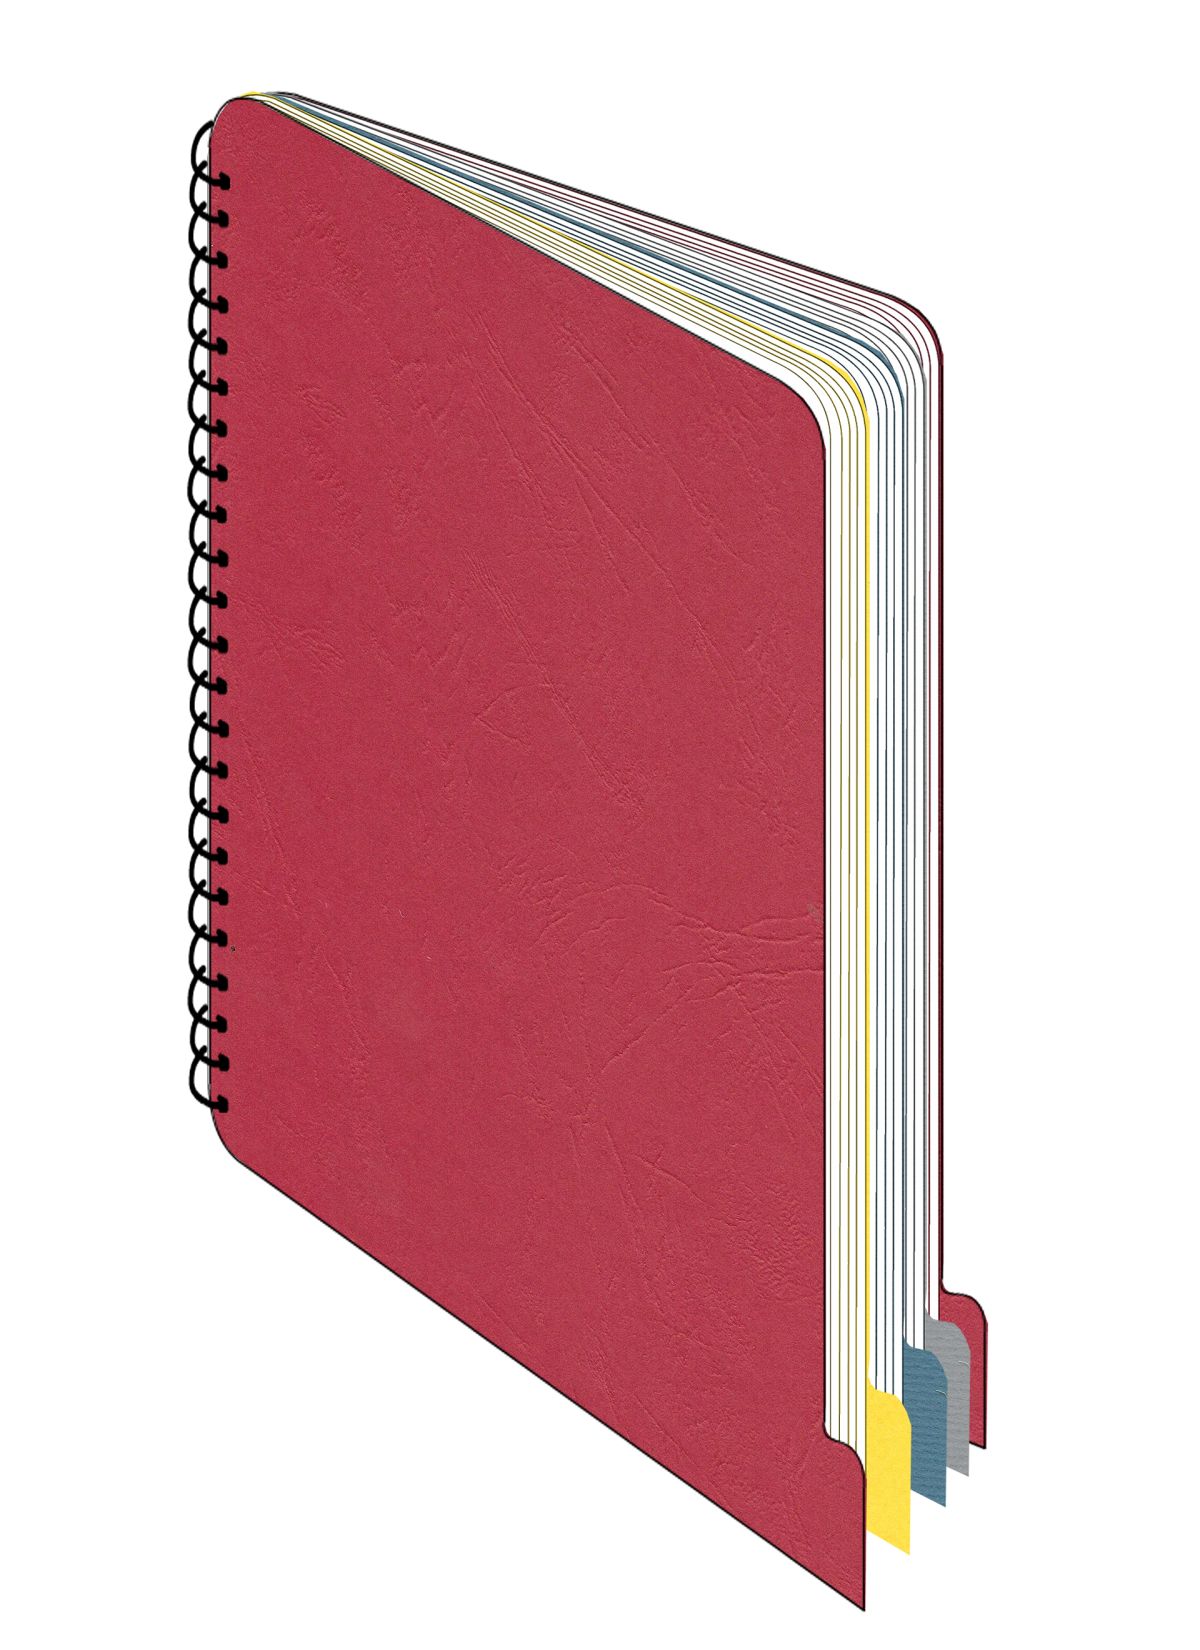 Notebook in the shape of a logo.